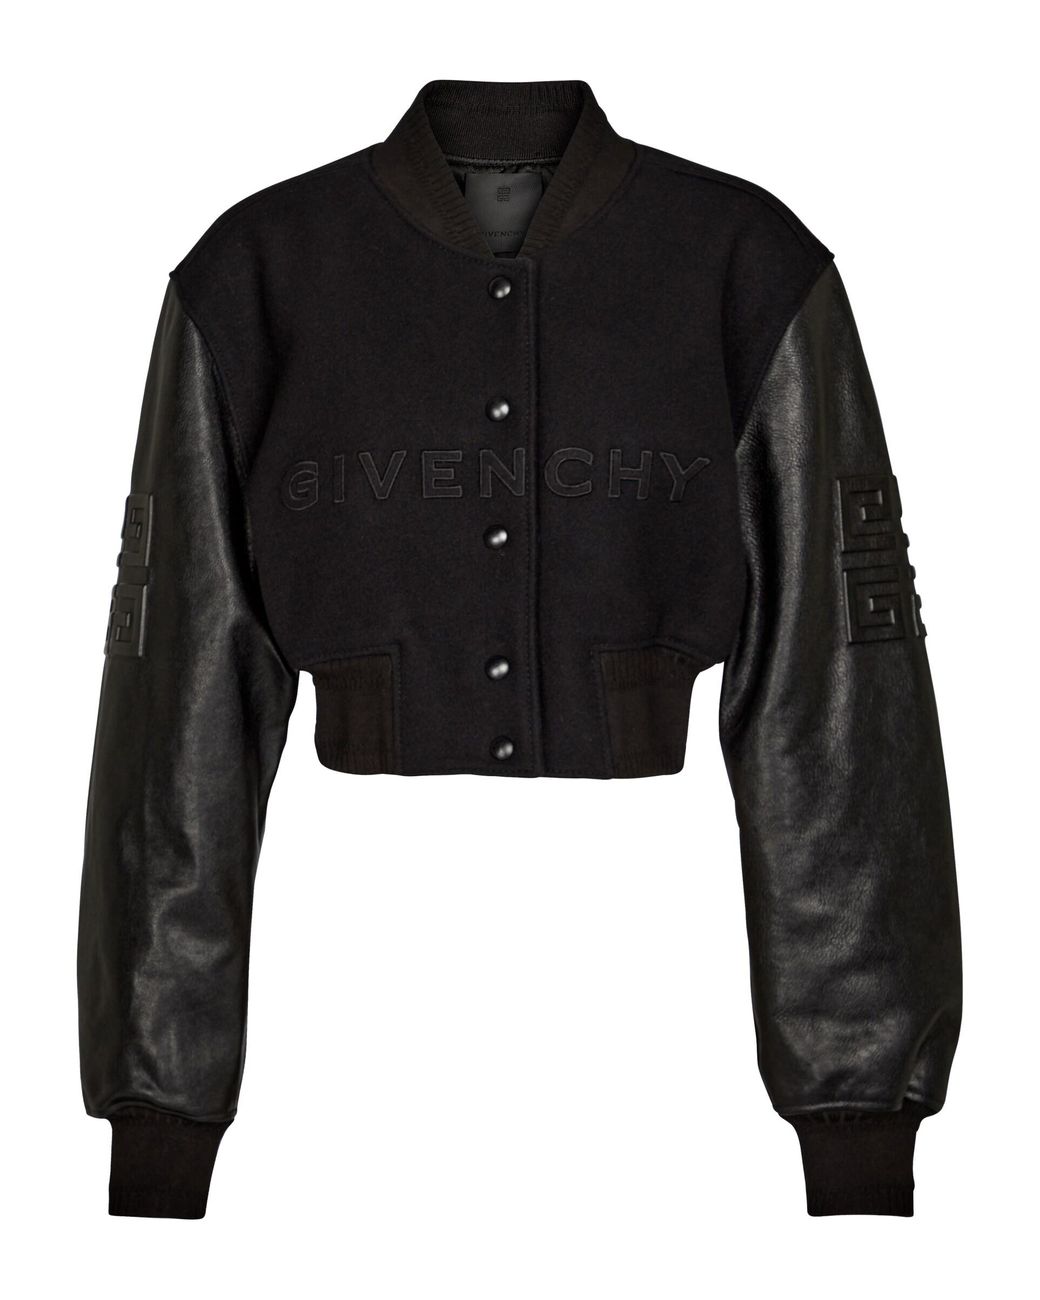 Givenchy 4g Cropped Bomber Jacket in Black | Lyst